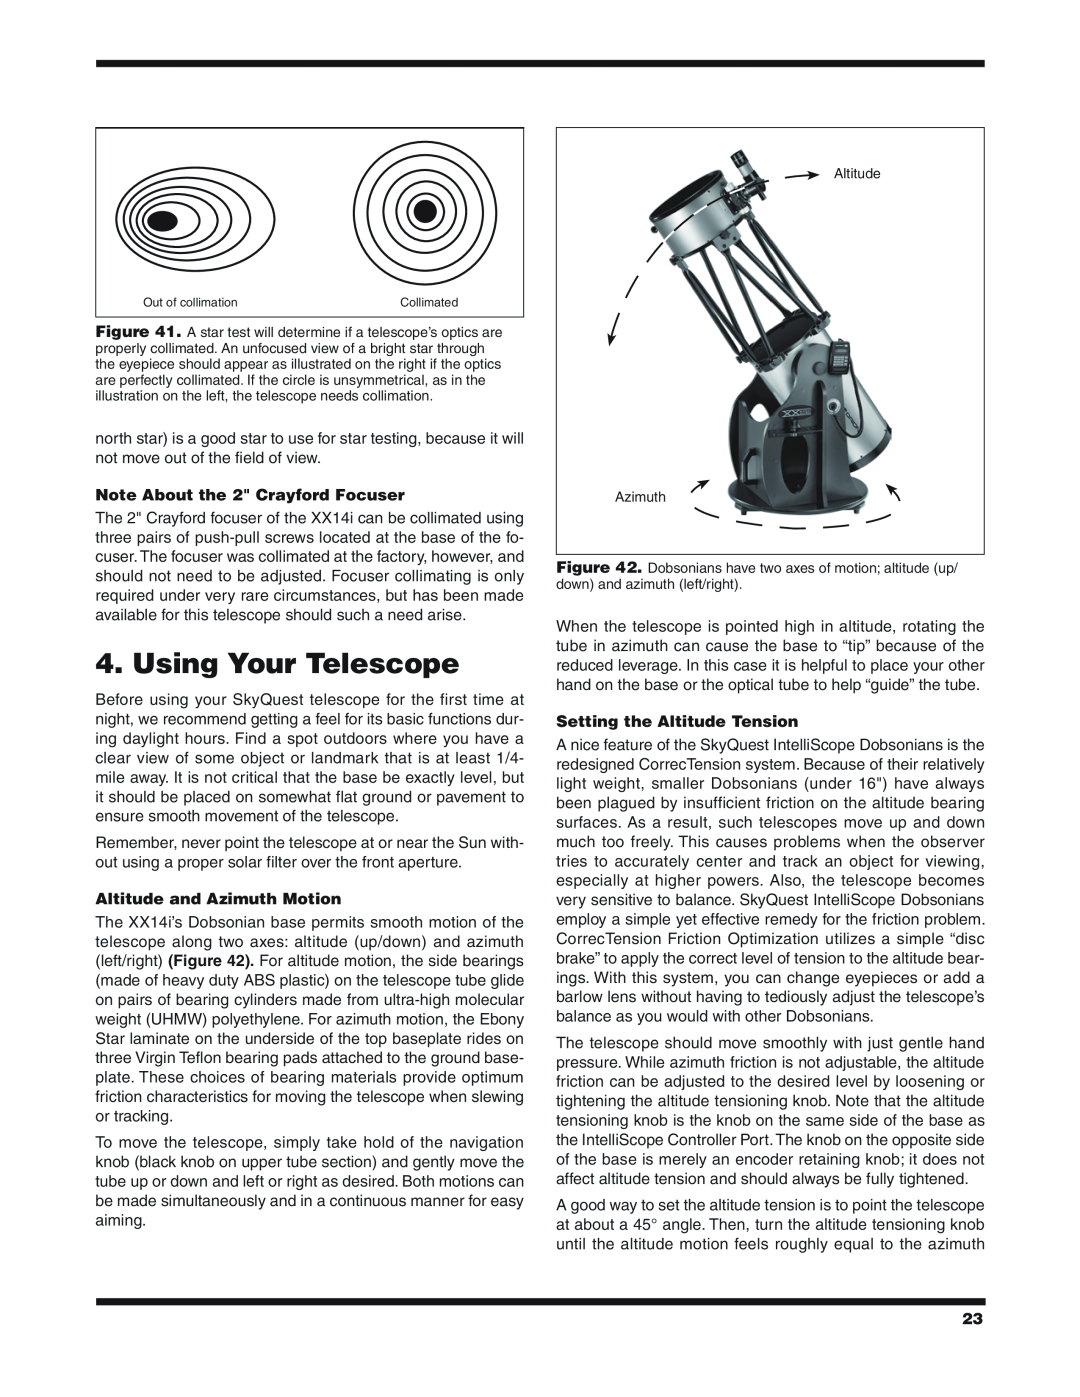 Orion 9791 instruction manual Using Your Telescope, Note About the 2 Crayford Focuser, Altitude and Azimuth Motion 